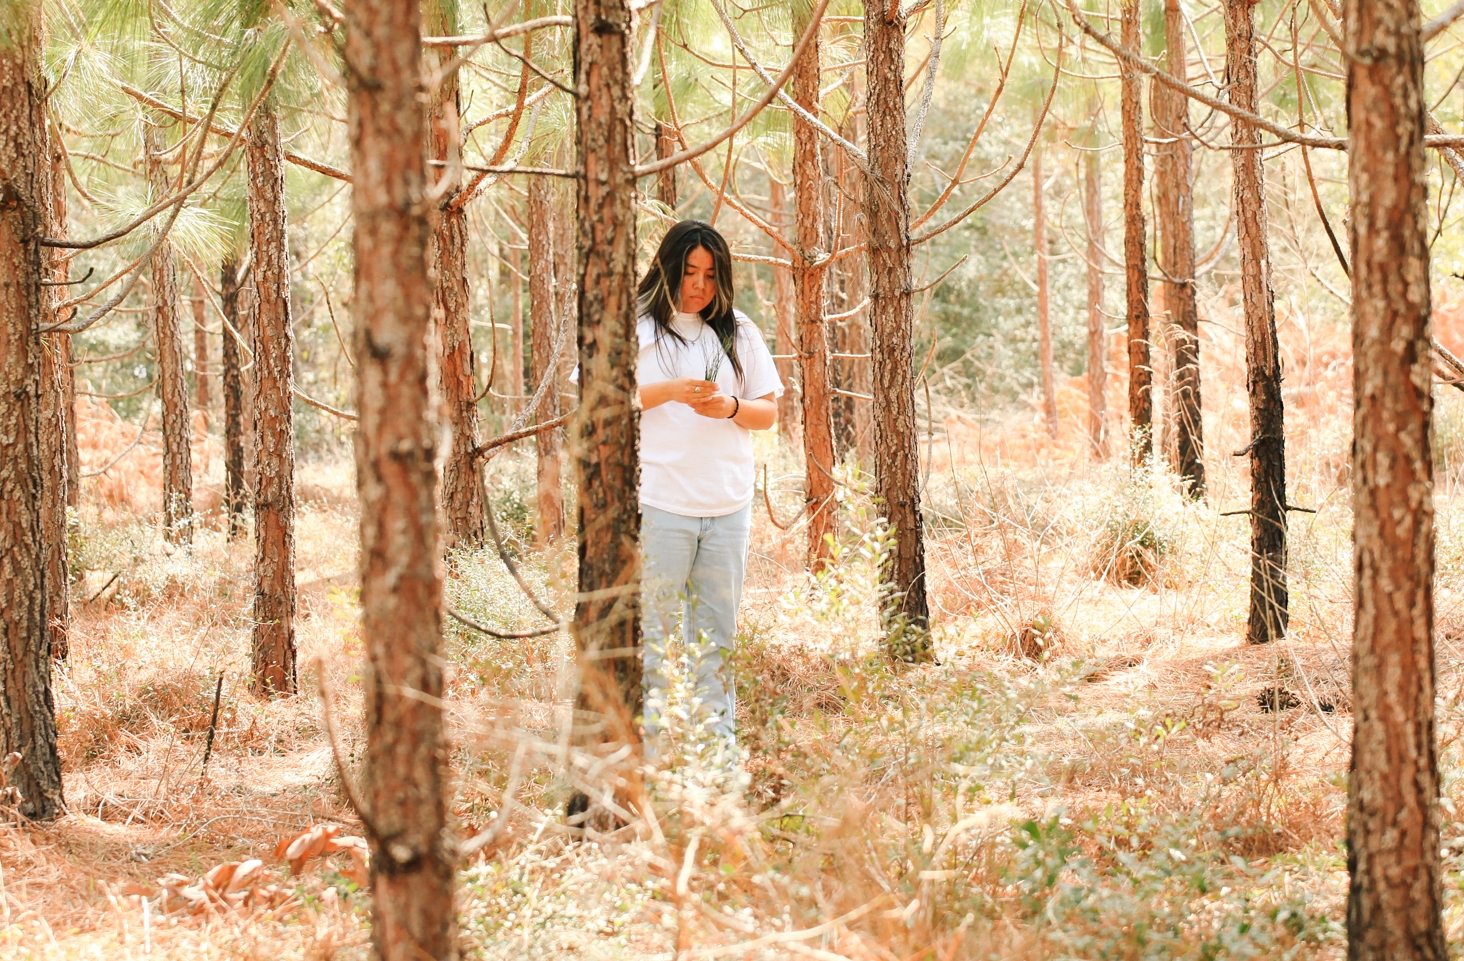  Charity Battise collects needles from longleaf trees.